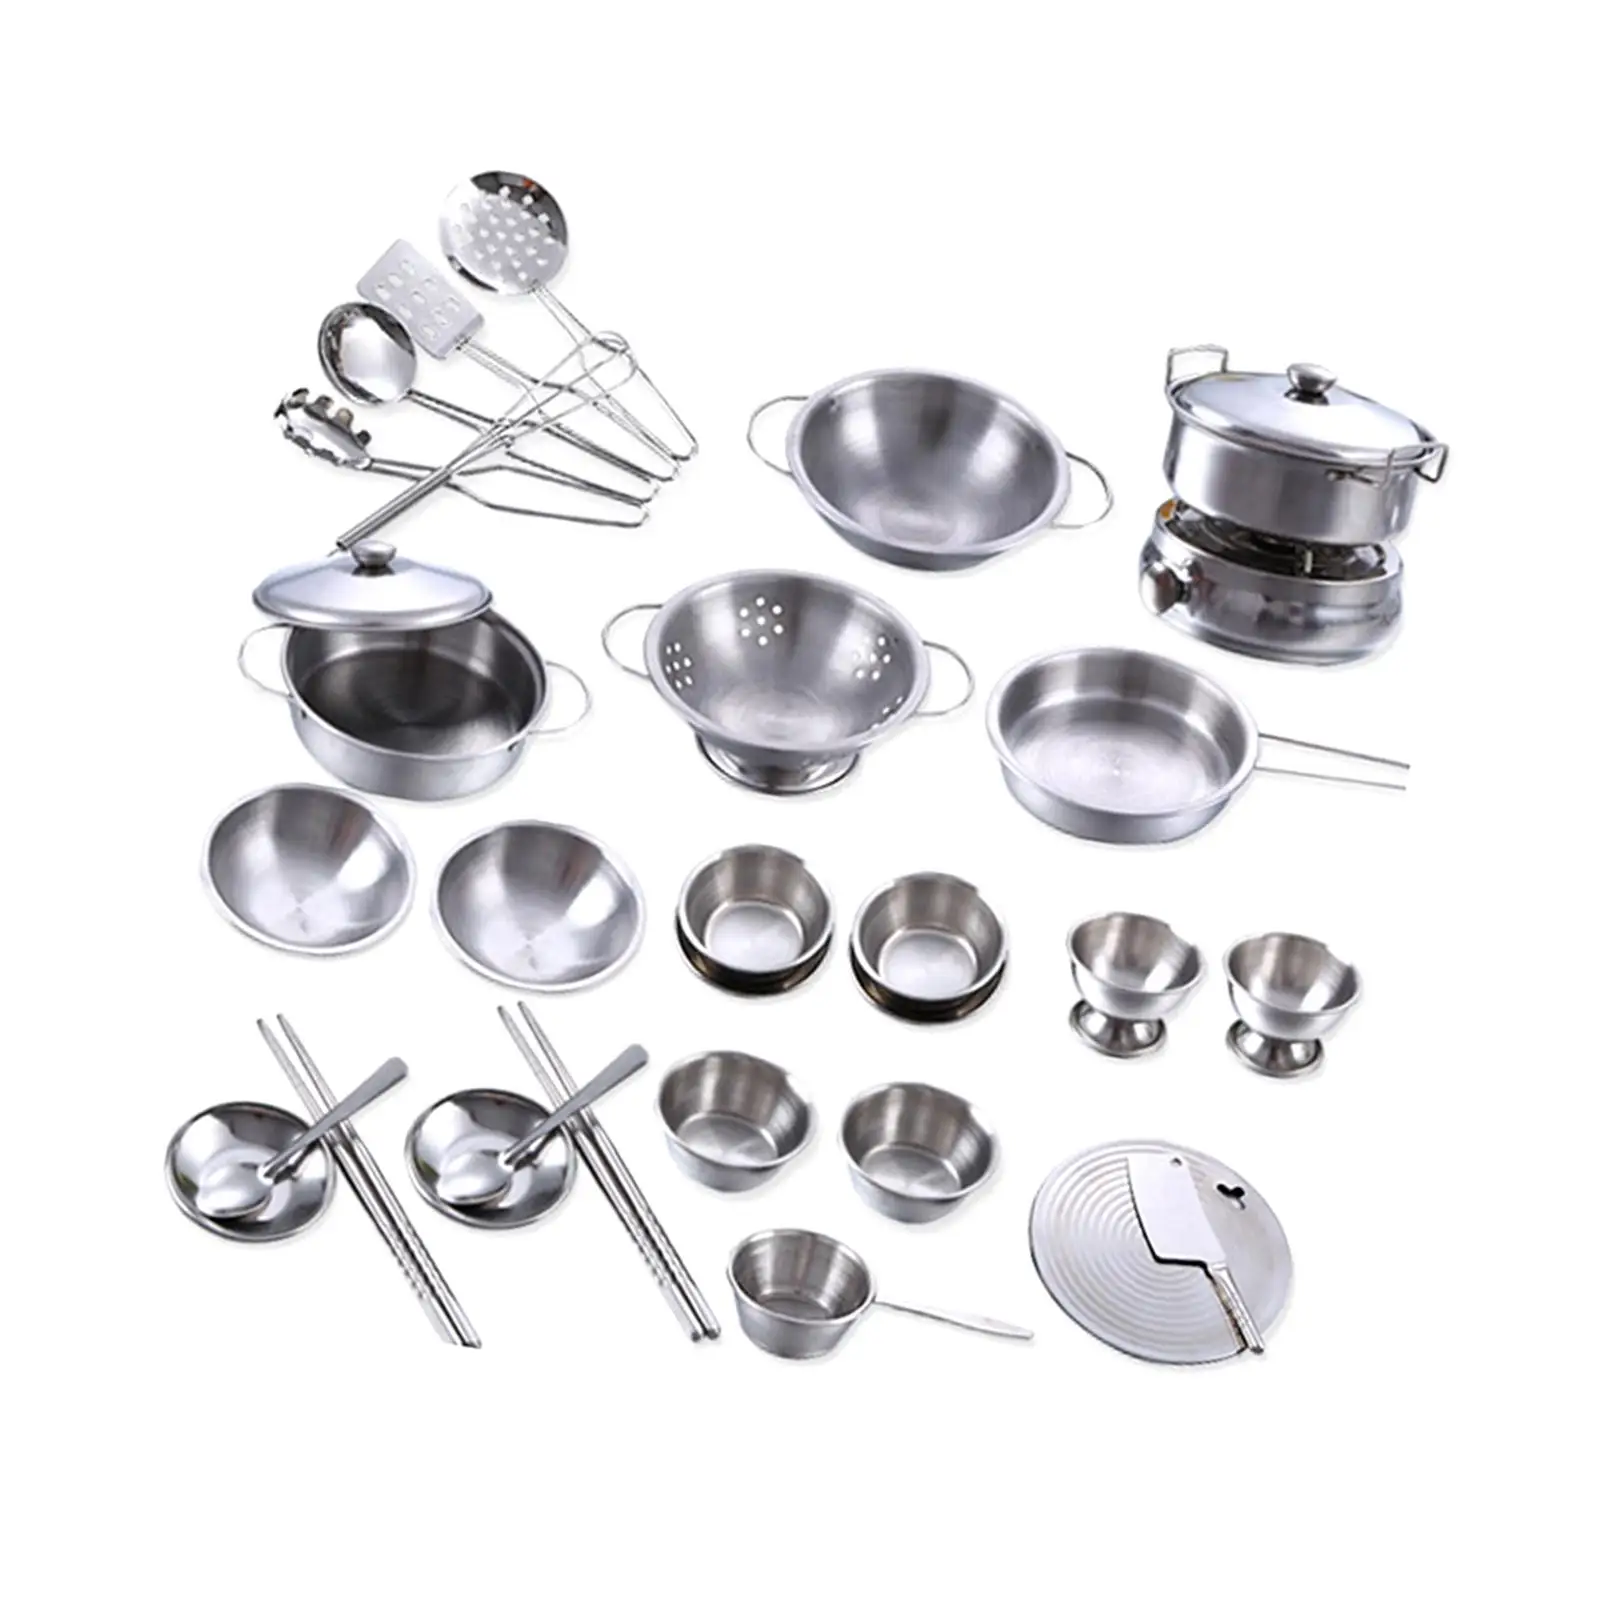 25 Pieces Kids Pretend Play Cookware Set Kitchen Toys for Child Realistic